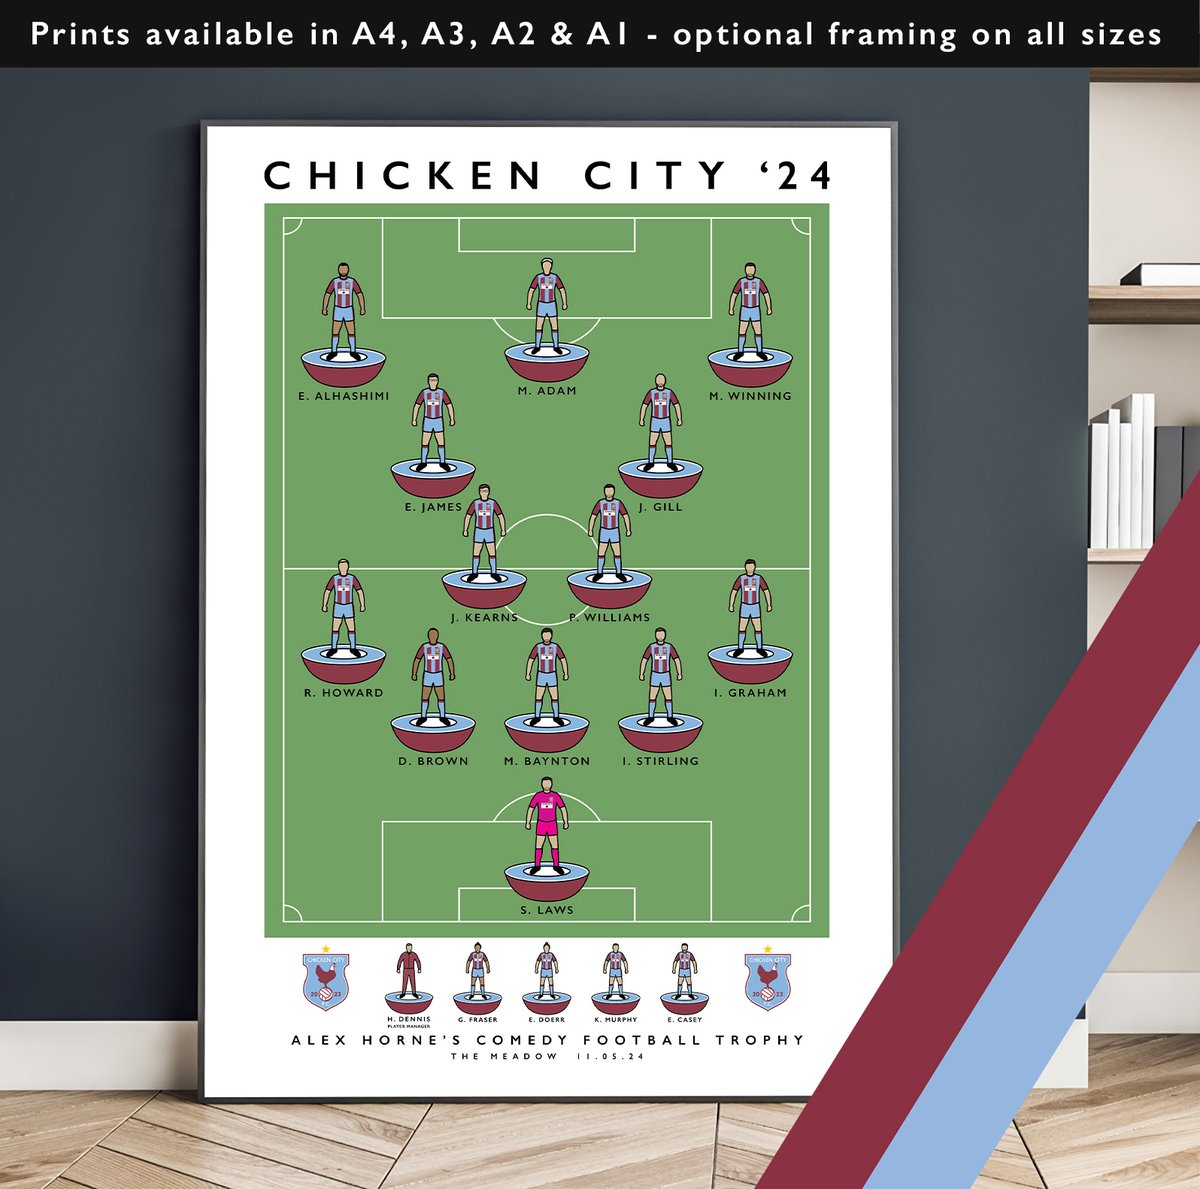 Amazing day at The Meadow yesterday for Alex Horne's Comedy Football Trophy 2024 Prints at the ground sold out fast, but are still available here (with 50% of proceeds going to @cheshamutdfc): matthewjiwood.com/alex-horne/chi… A superb performance from Chicken City @AlexHorne